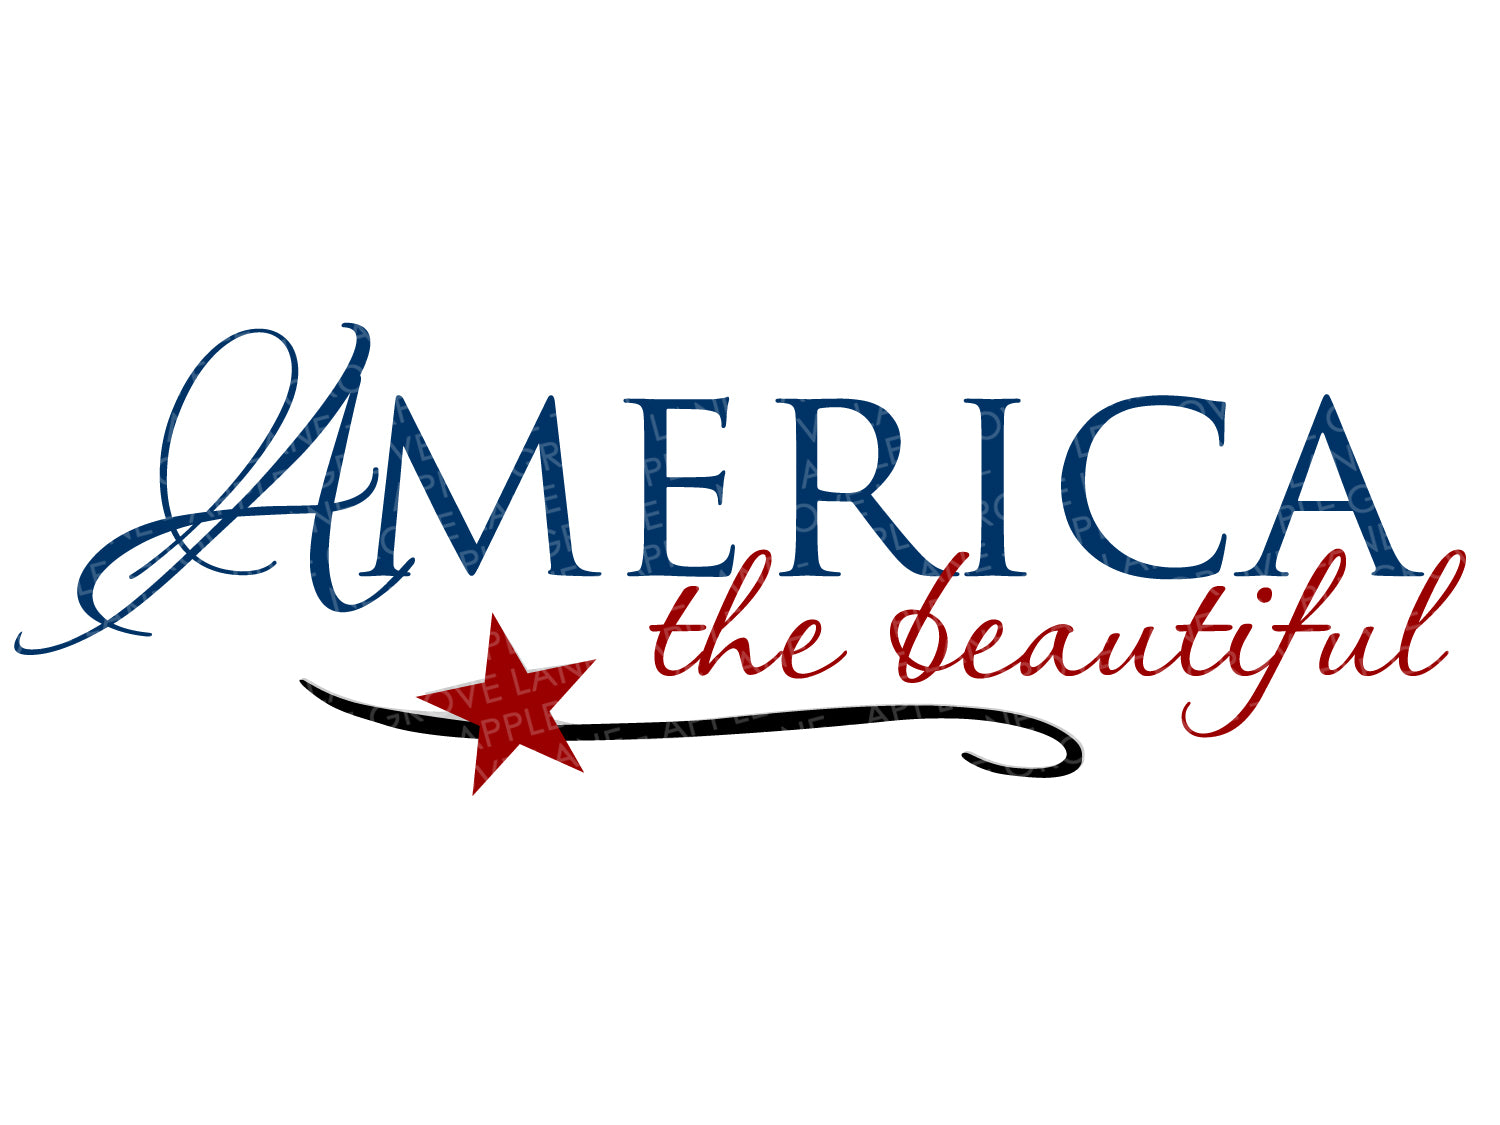 America the Beautiful Svg - Patriotic Svg - 4th of July Svg - America Svg - Fourth of July Svg - Flag Svg - Patriotic Shirt - Americana Sign